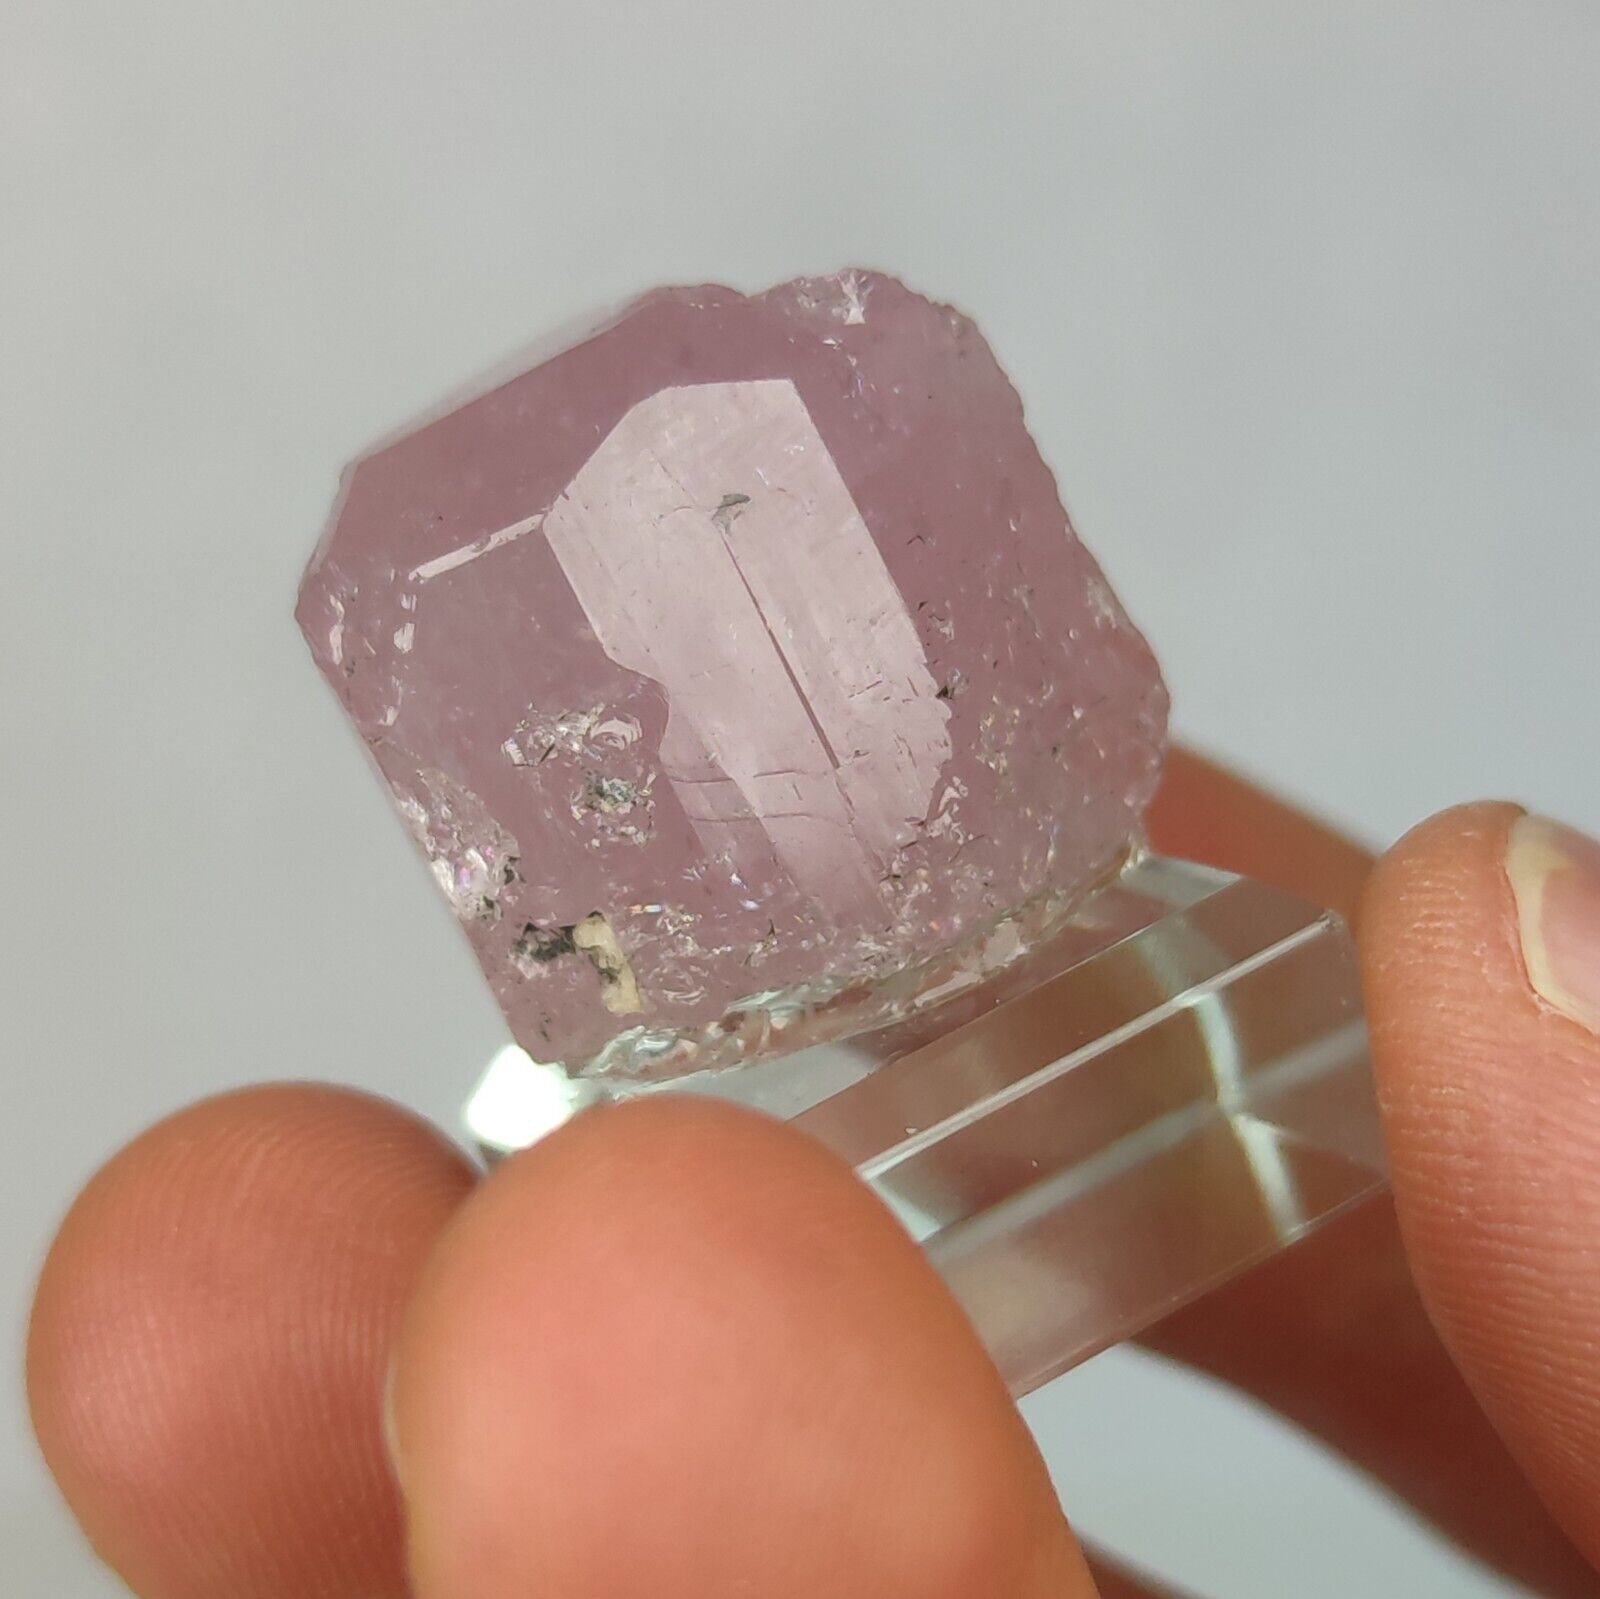 FLUORAPATITE CRYSTAL - HIGH QUALITY FROM BOYACÁ, COLOMBIA 50 Carats